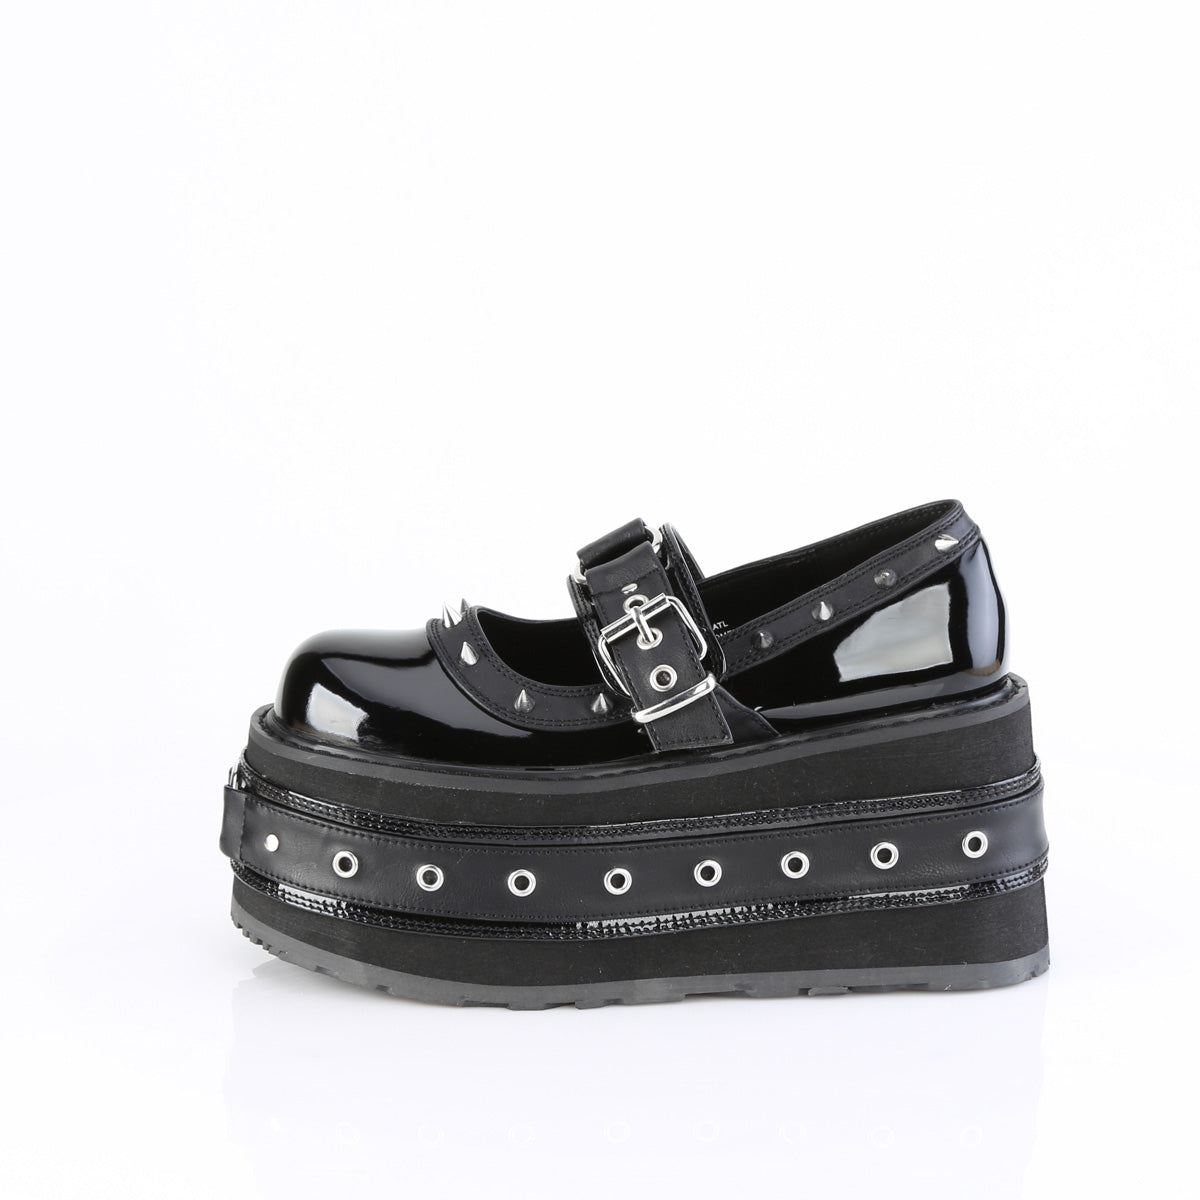 DAMNED-20 Spike Patent Leather Maryjane Shoes by Demonia